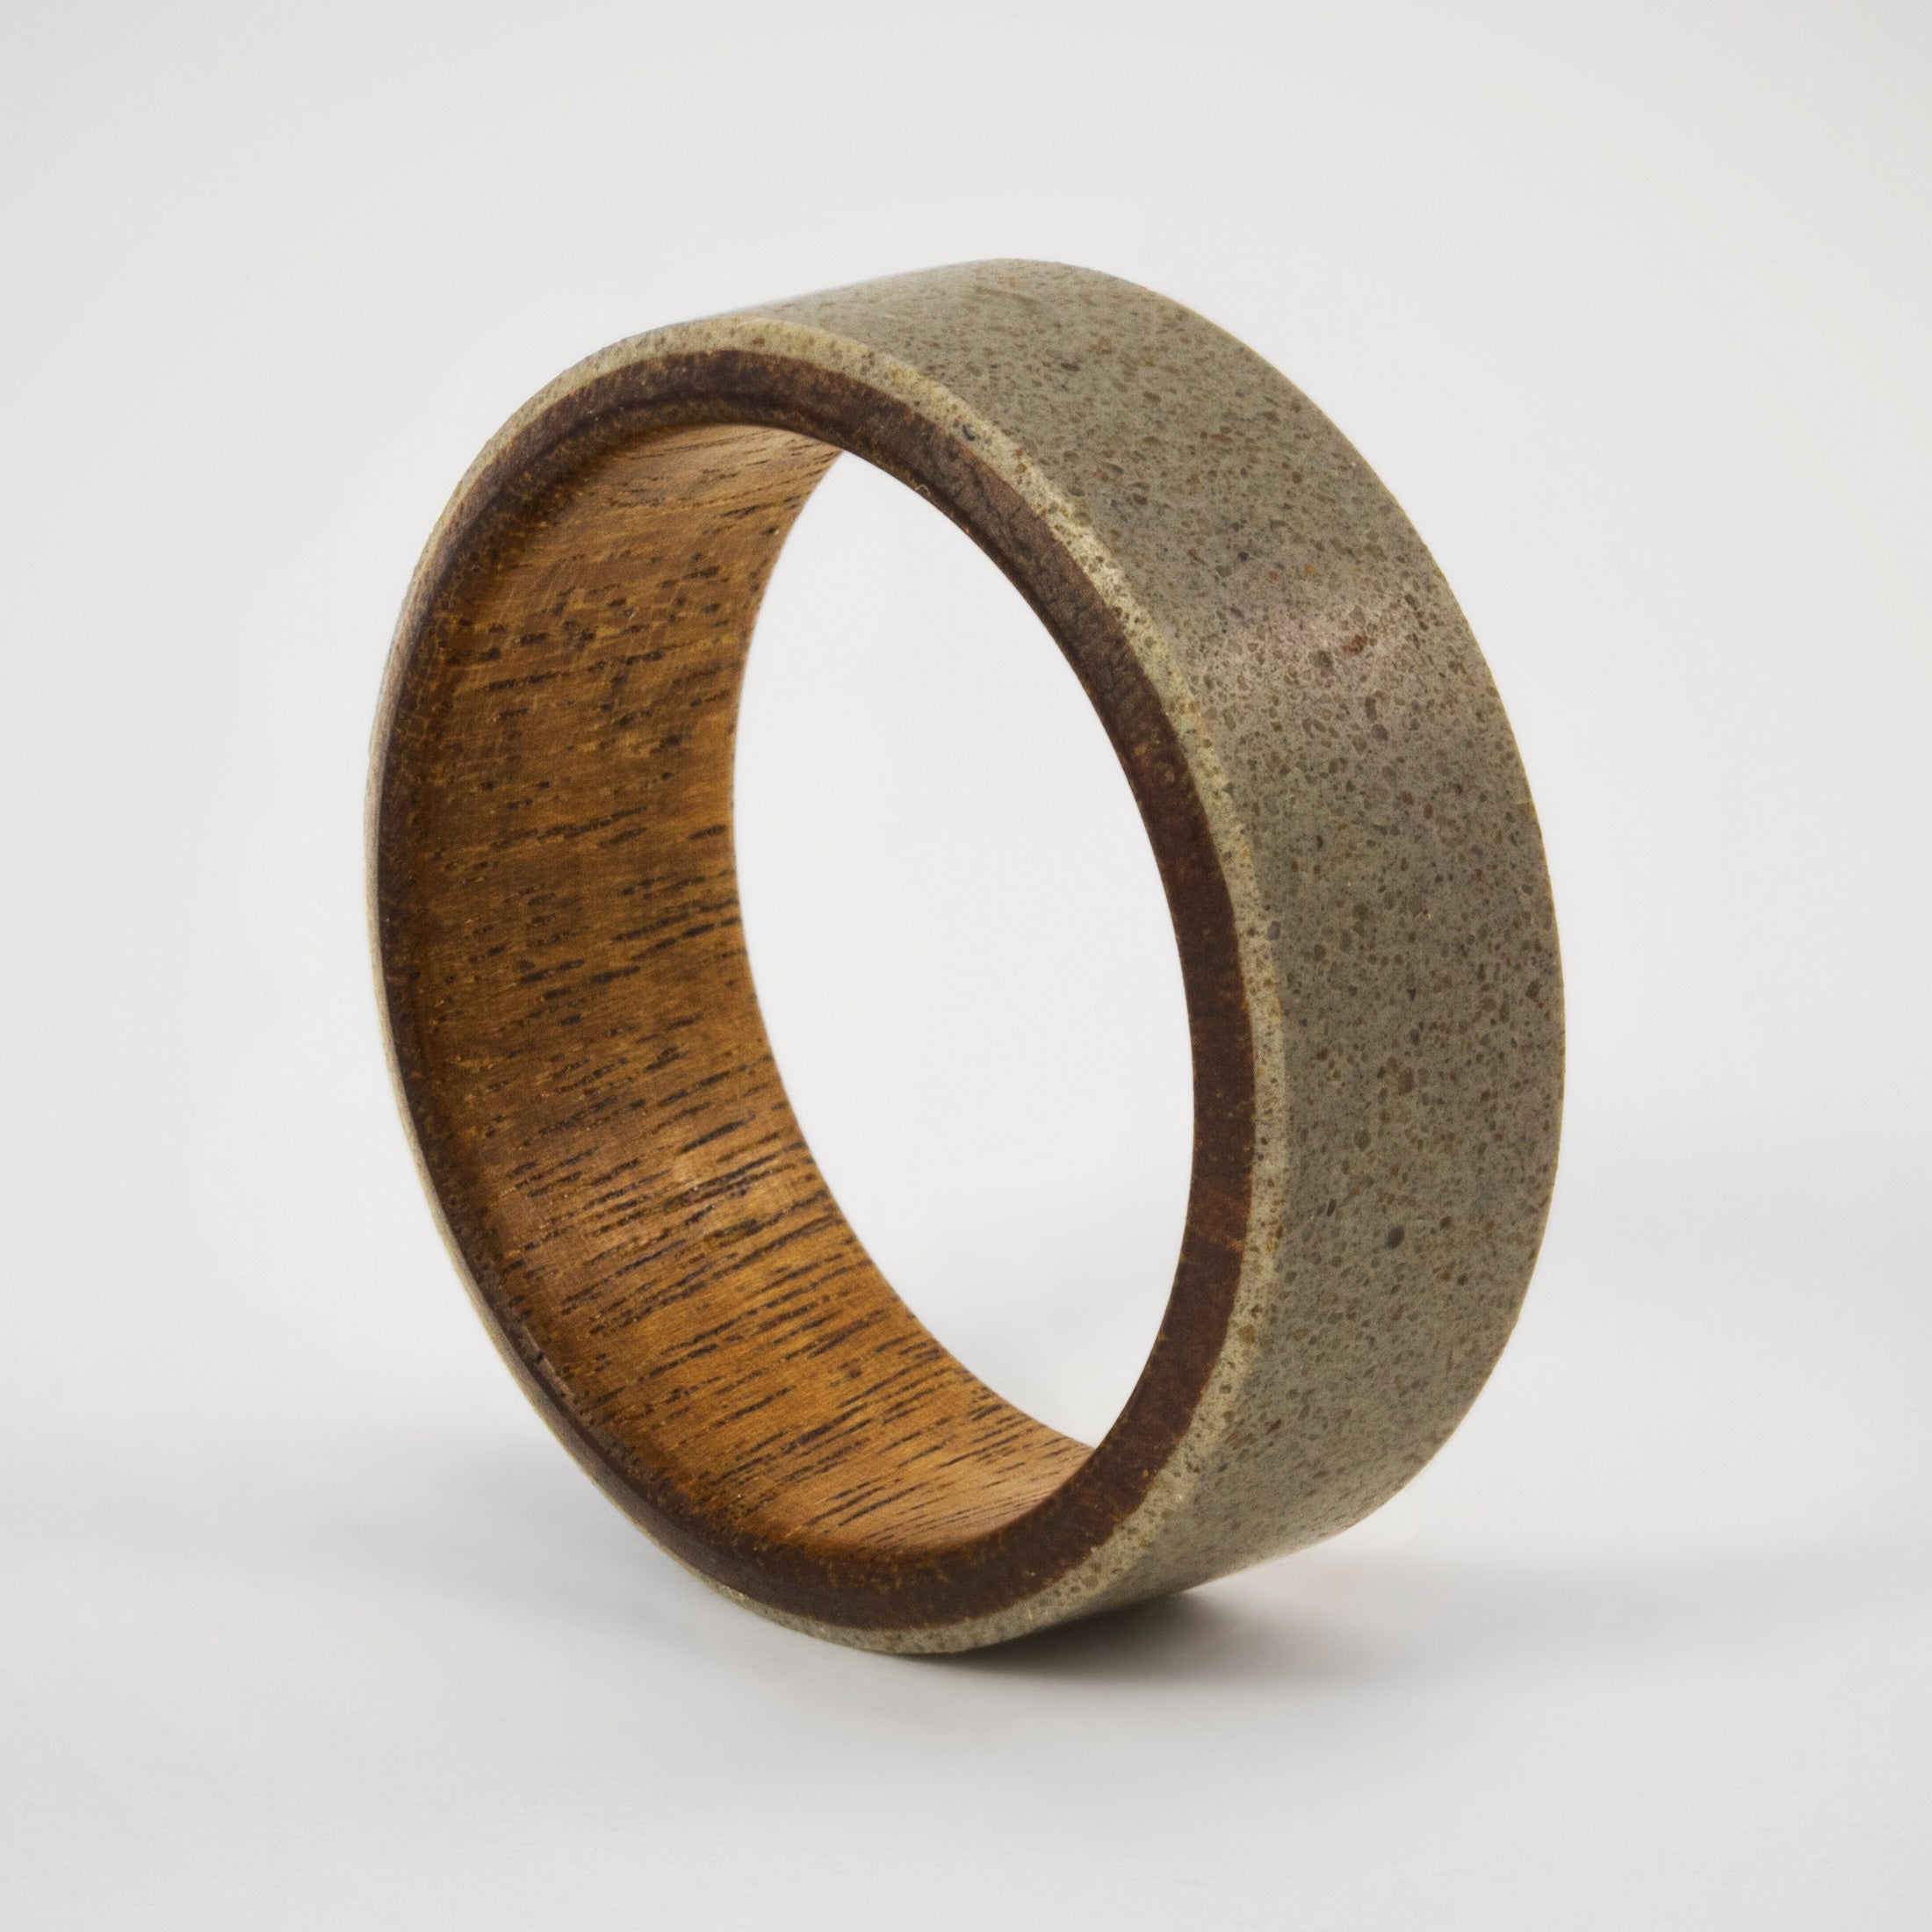 Gray concrete & incense wood ring